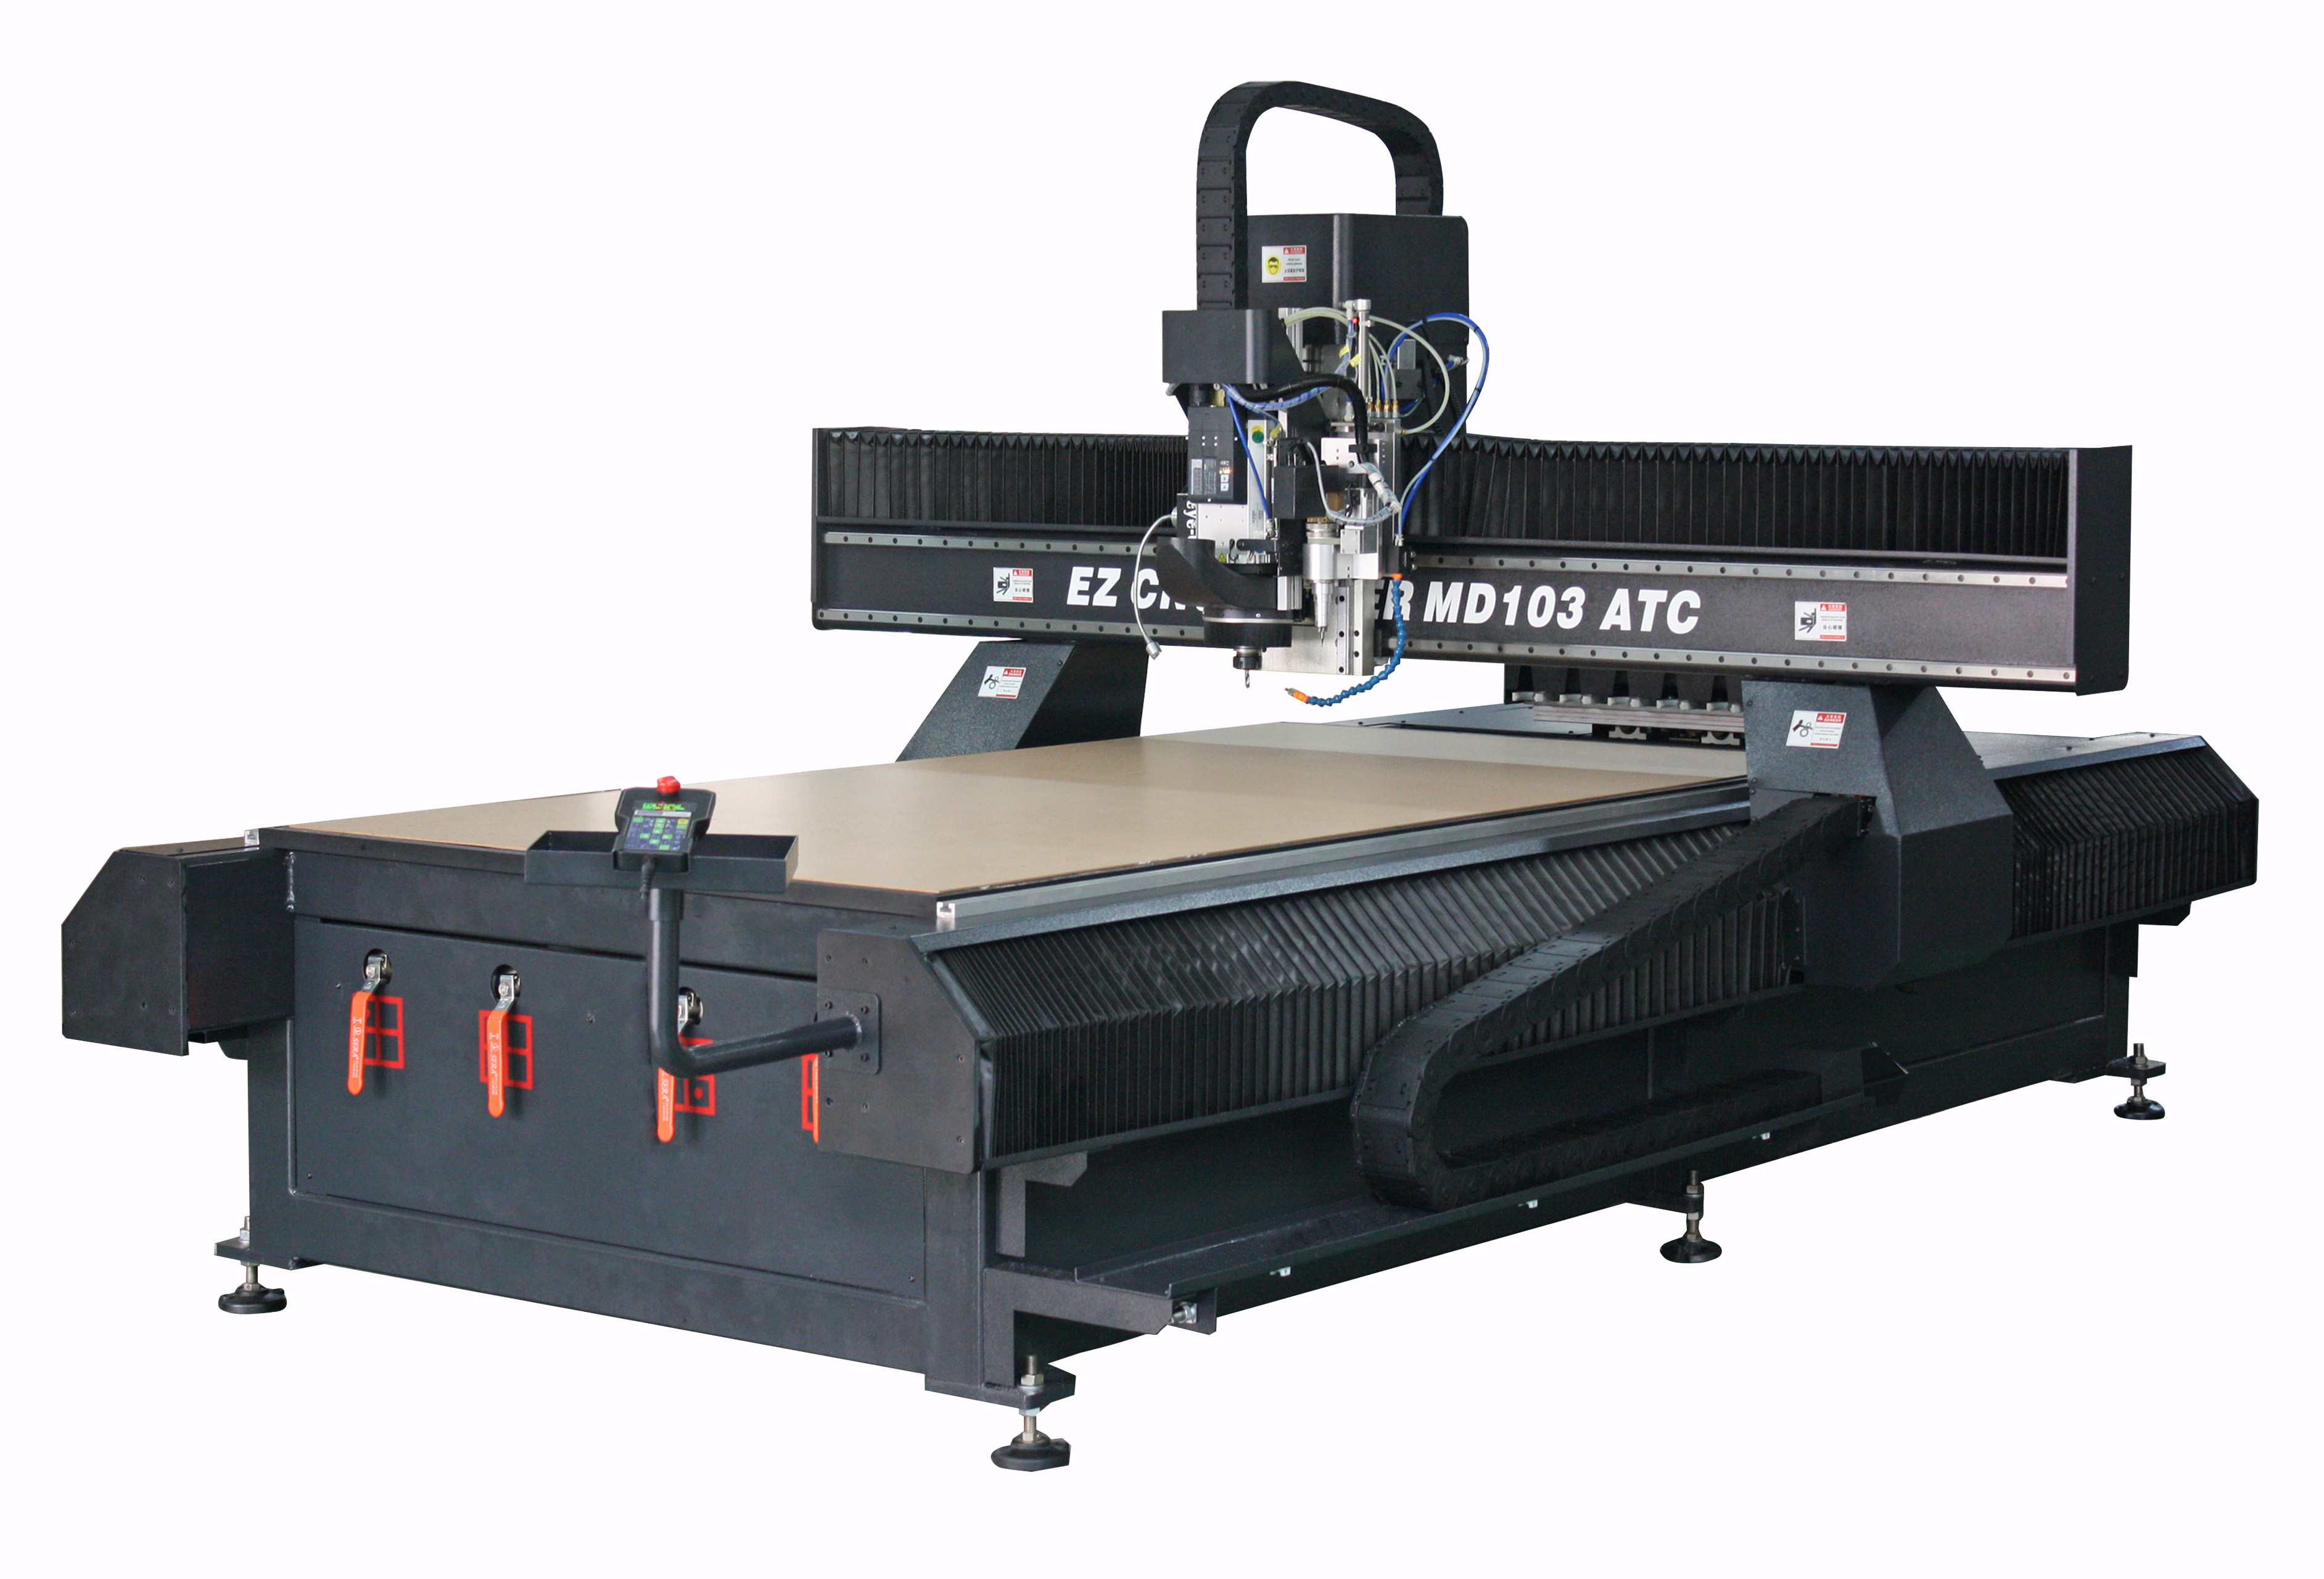  EZCNC Routers-MD 1325/Wood, Acrylic, Alu. 3D Surface; SolidSurface cutting, engraving and marking system Manufactures